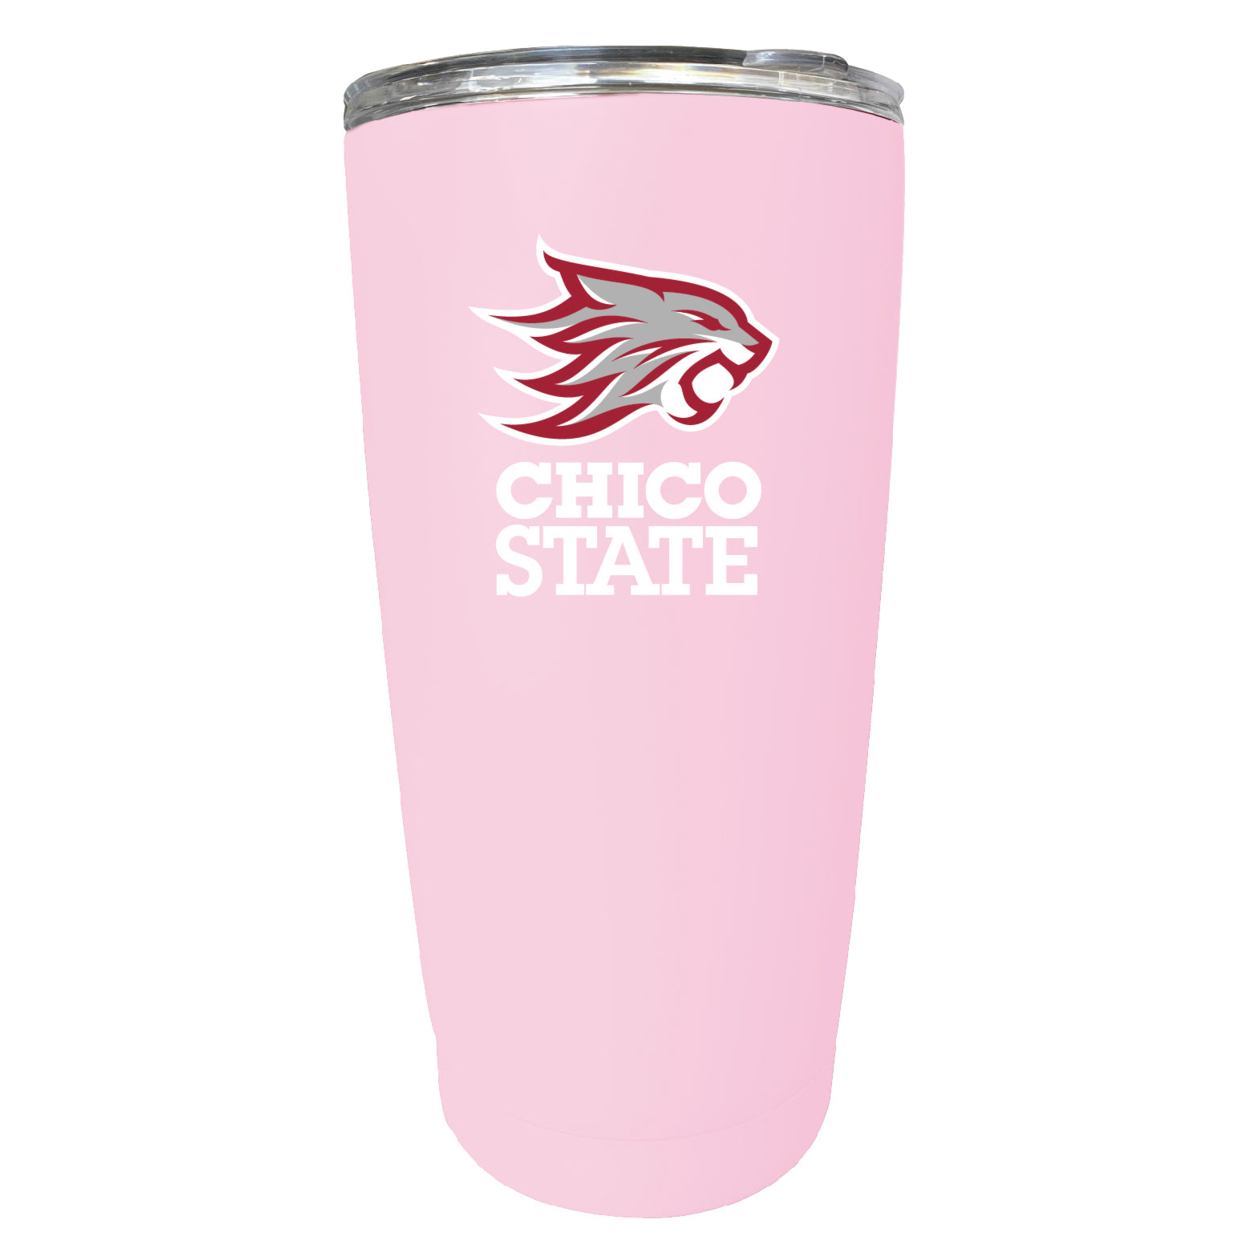 California State University, Chico 16 Oz Stainless Steel Insulated Tumbler - Pink